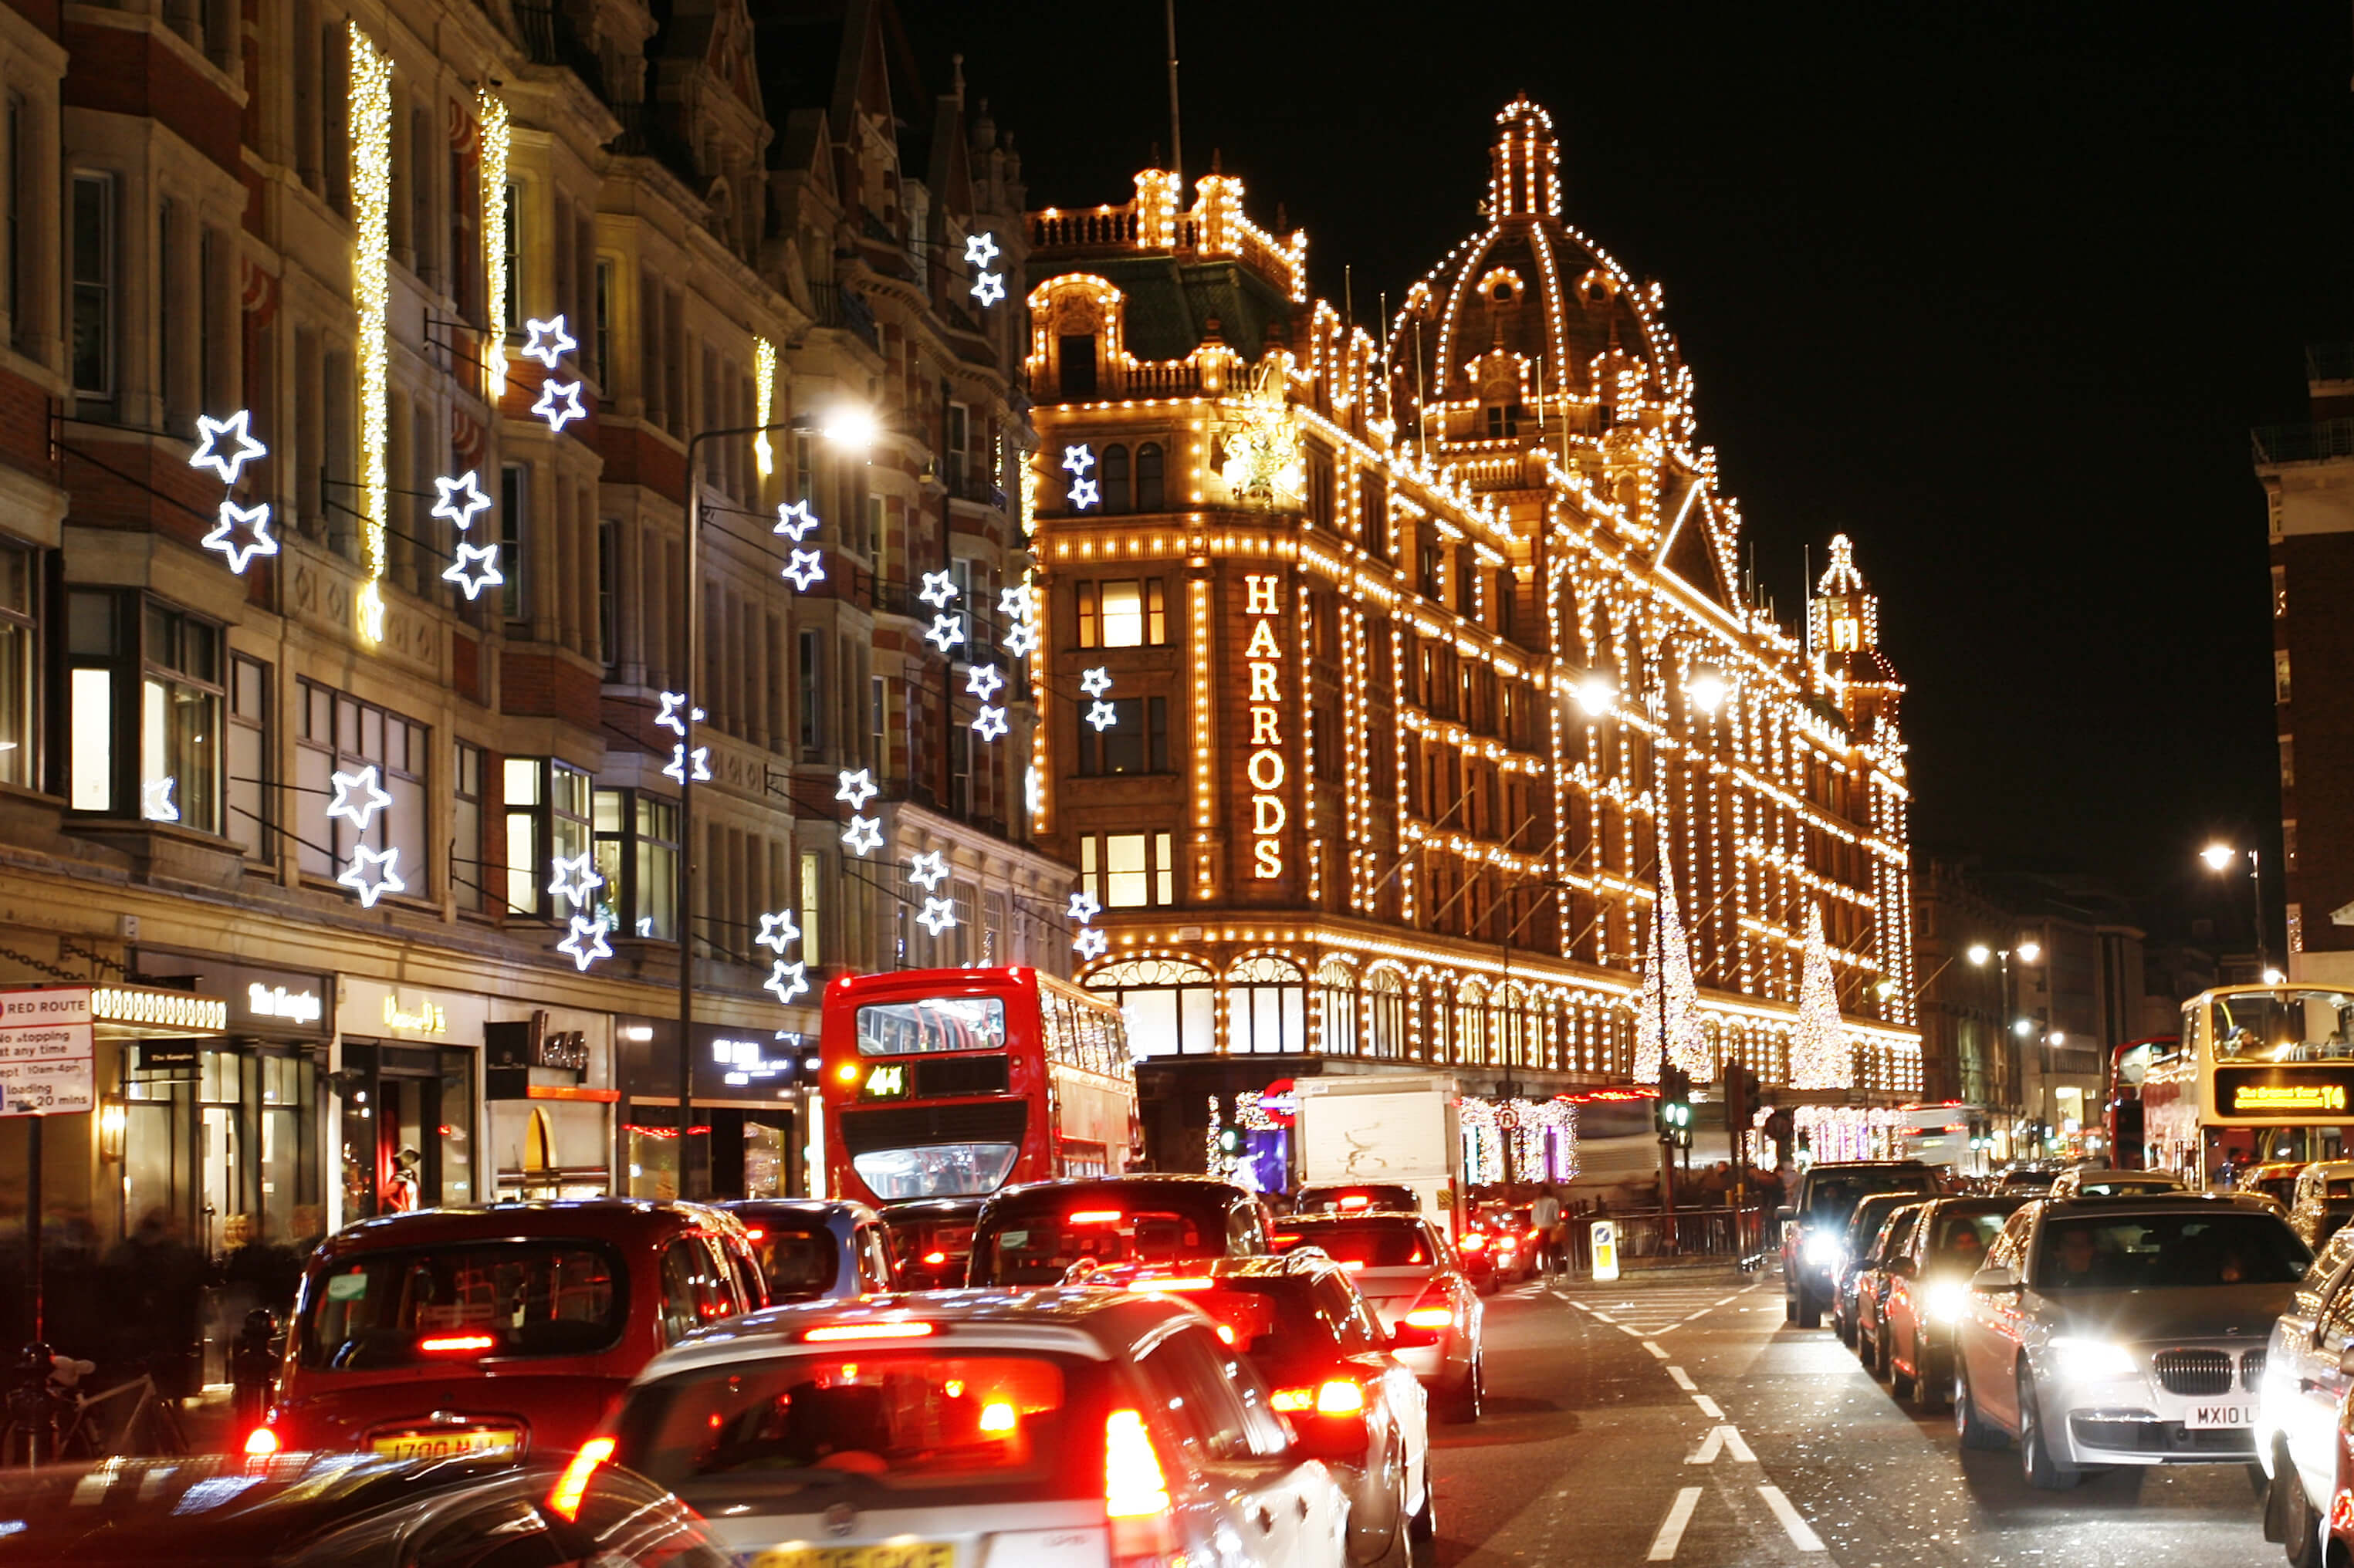 How will Brexit impact UK retail this Christmas?